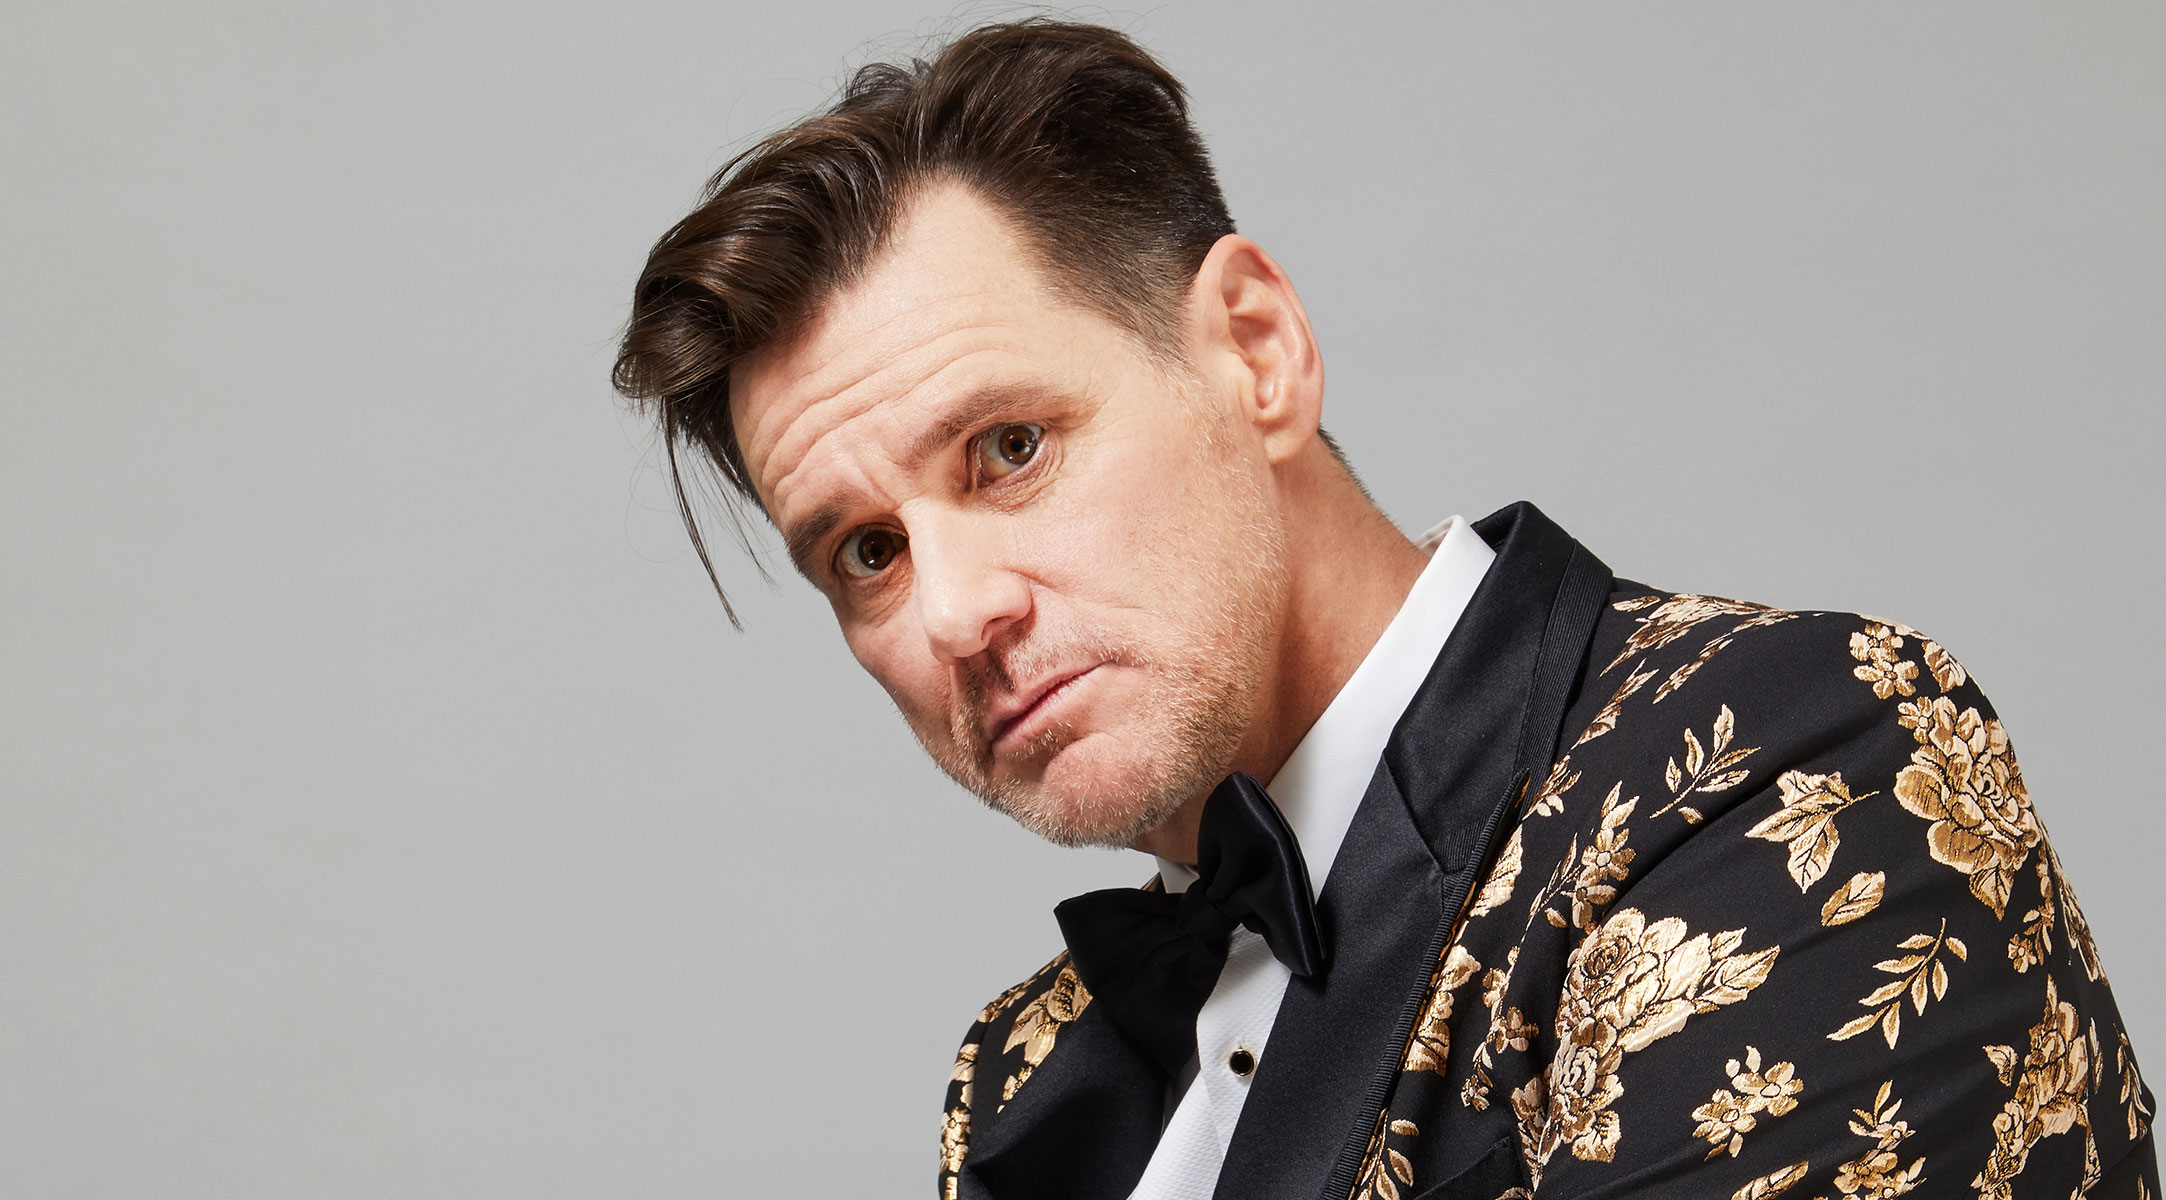 Jim Carrey is a Canadian-American comedian, actor, and producer.